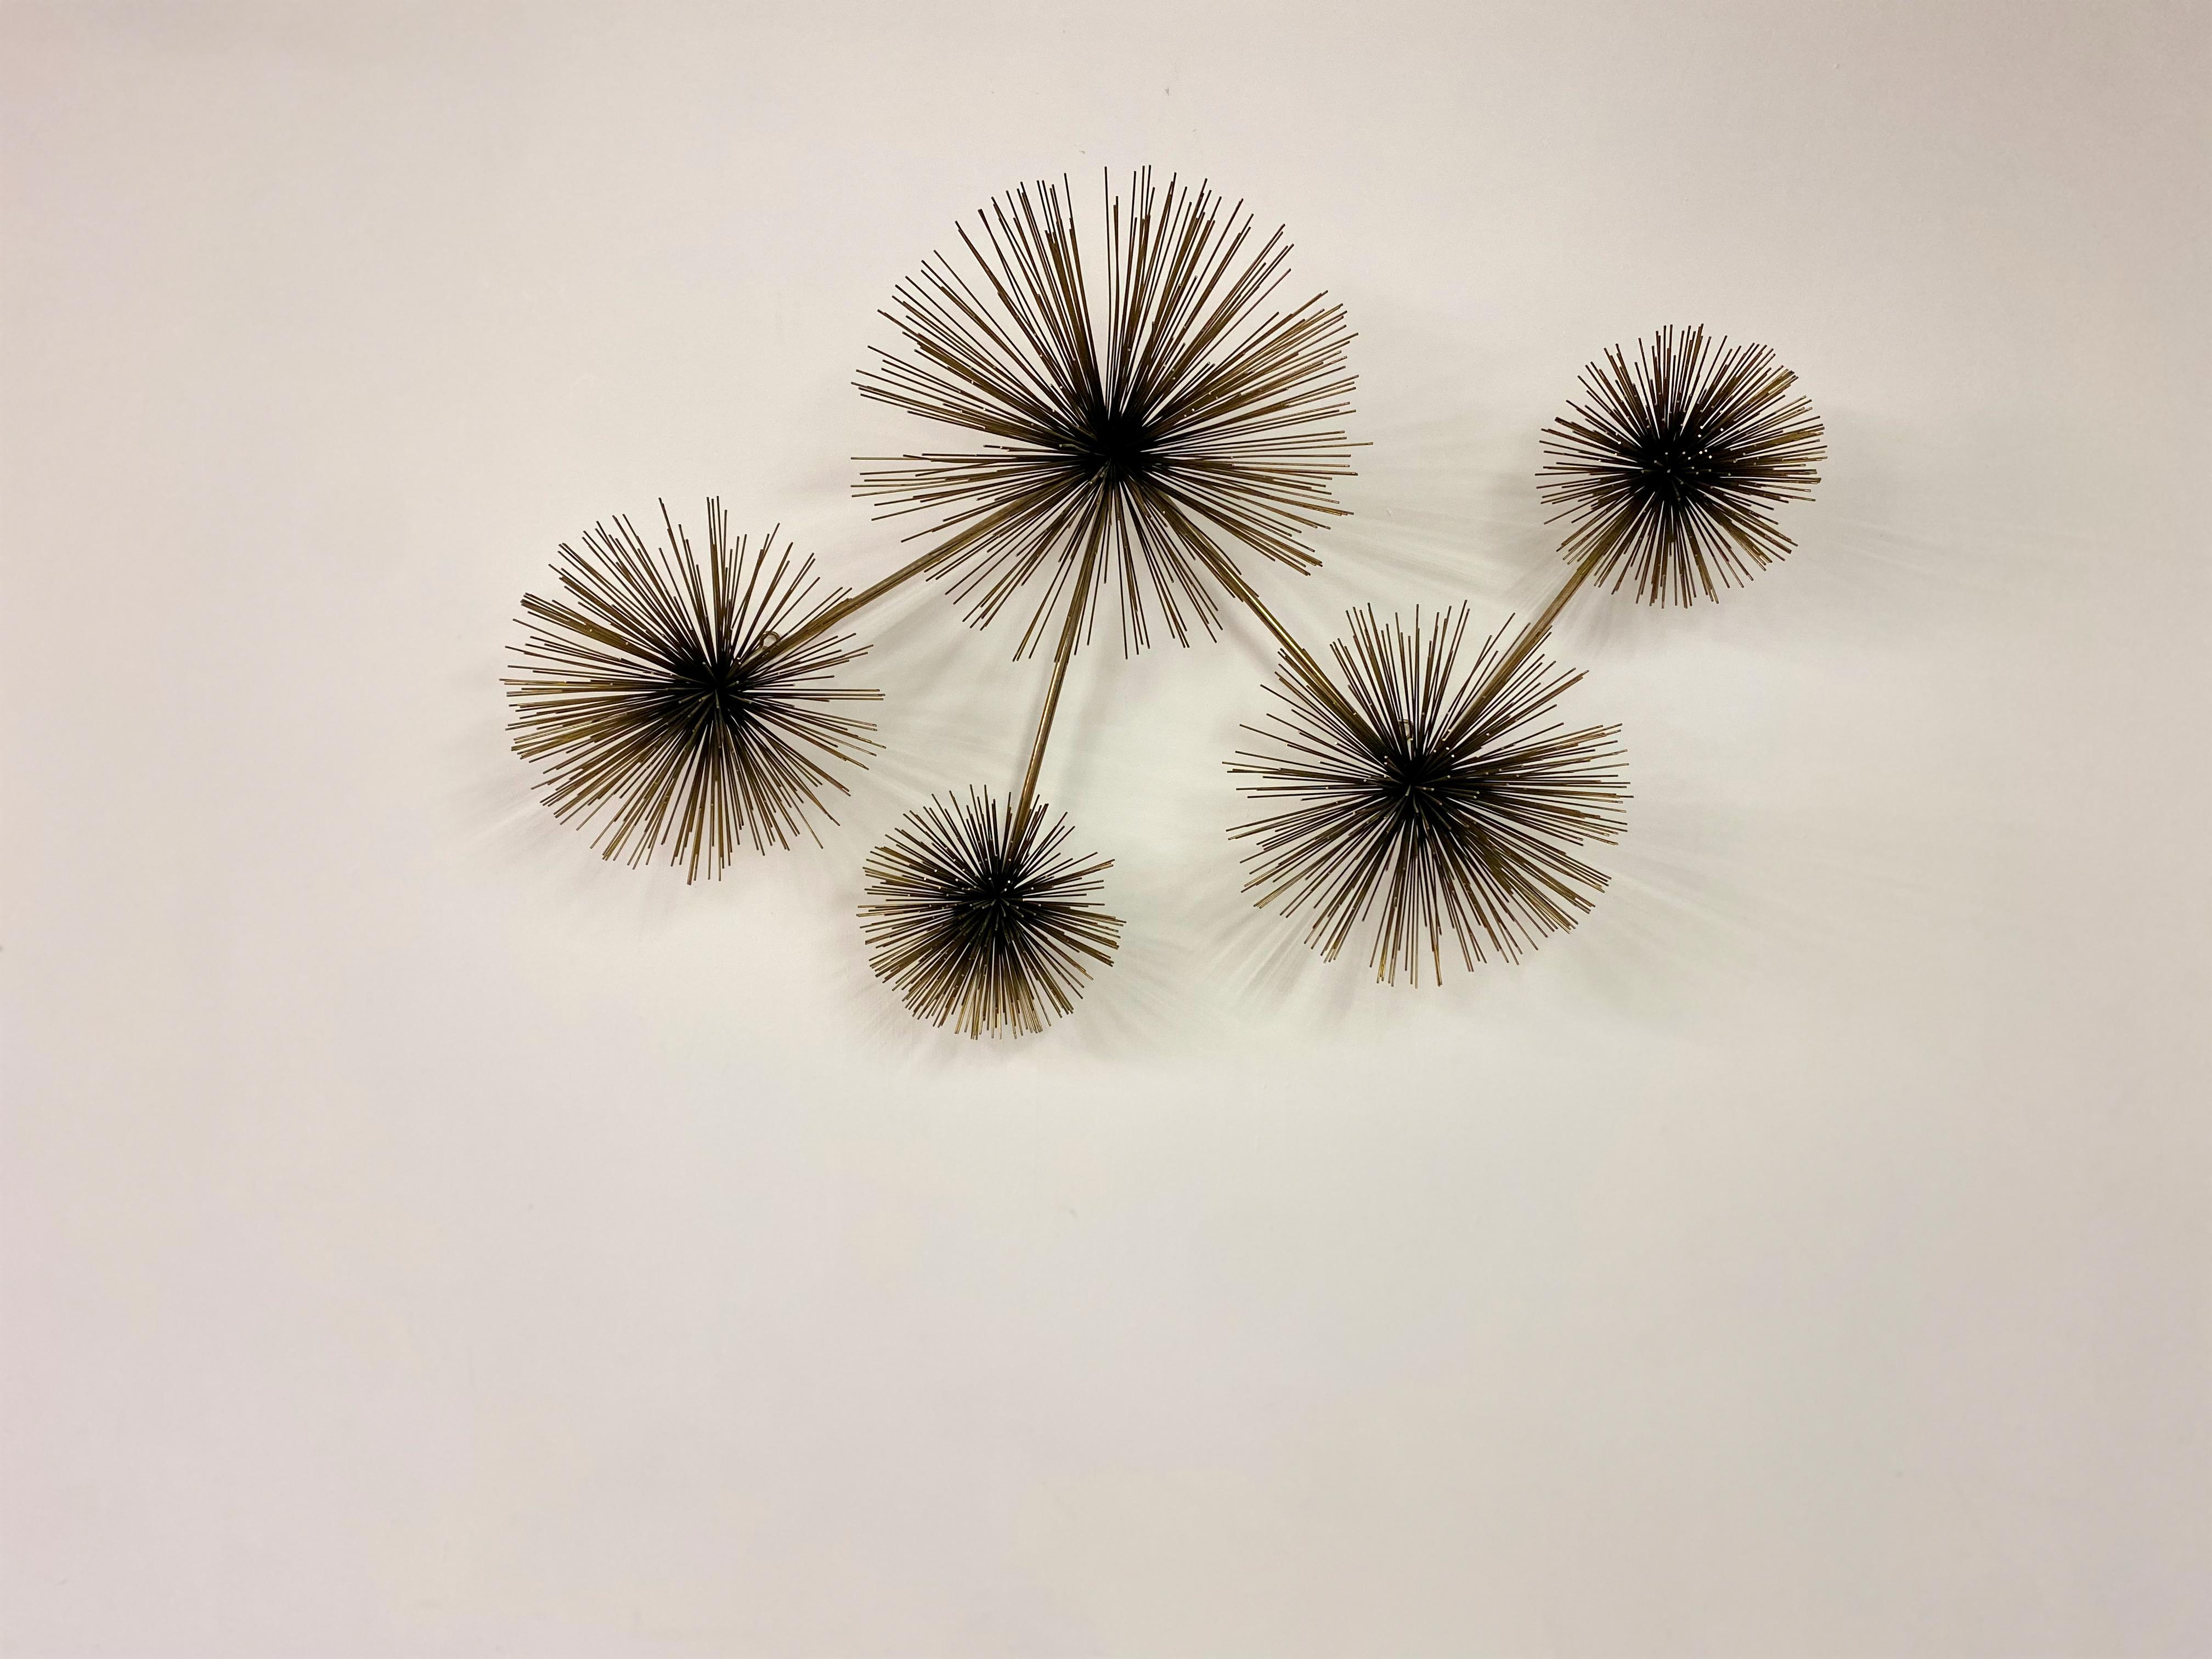 1970s Wall Mounted Starburst Sculpture By Curtis Jere In Good Condition For Sale In London, London